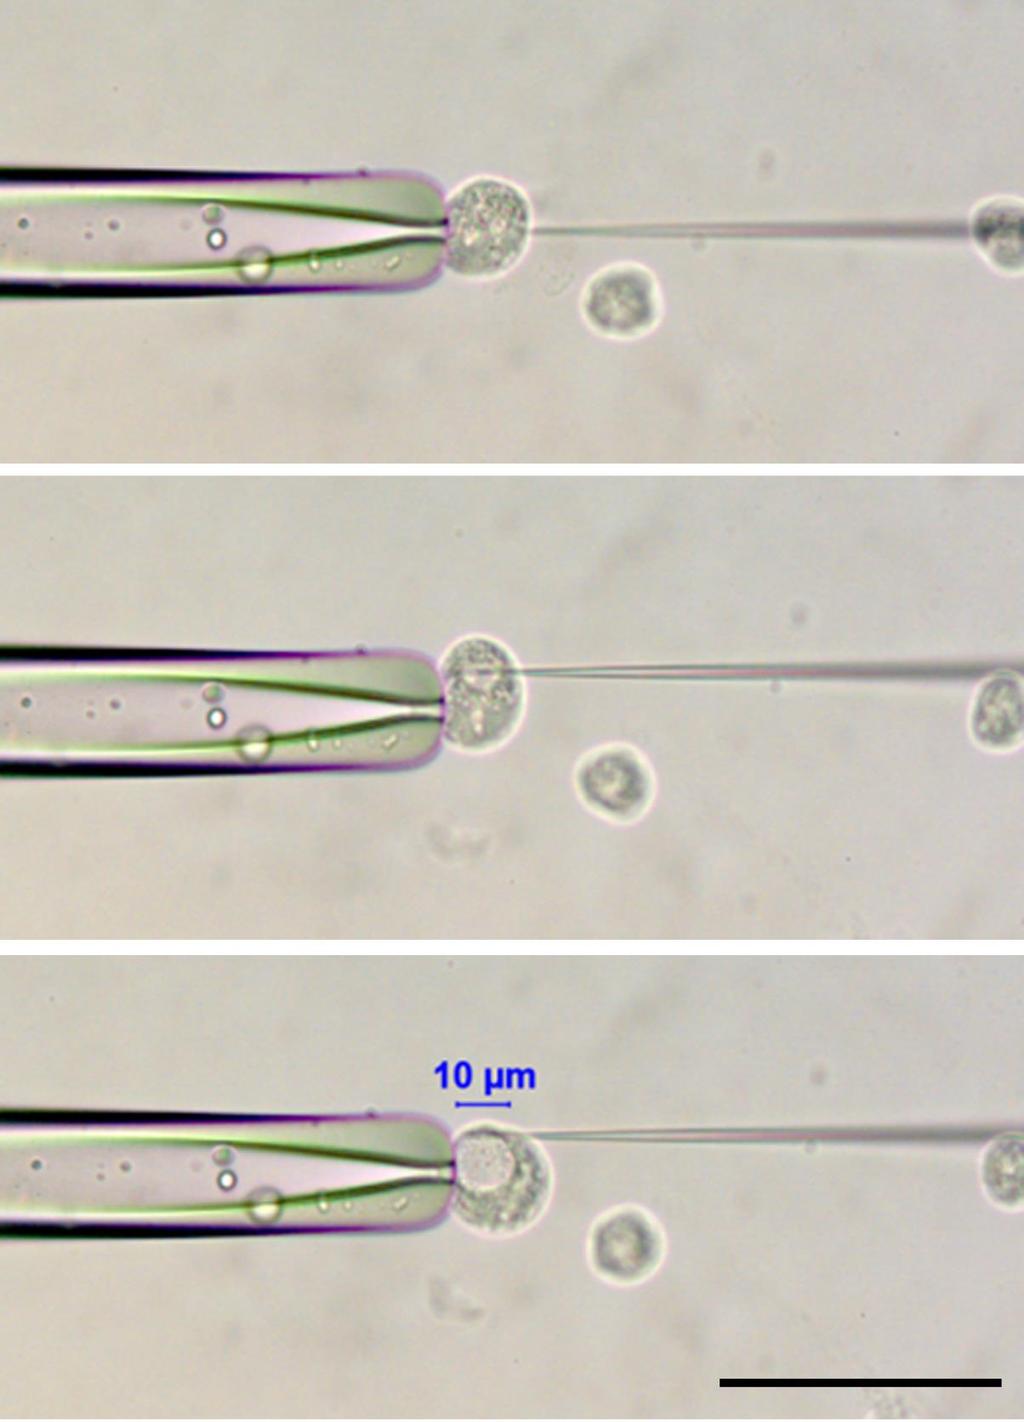 Fig. S Three continuous images during microinjection into trophozoites of Entamoeba invadens.